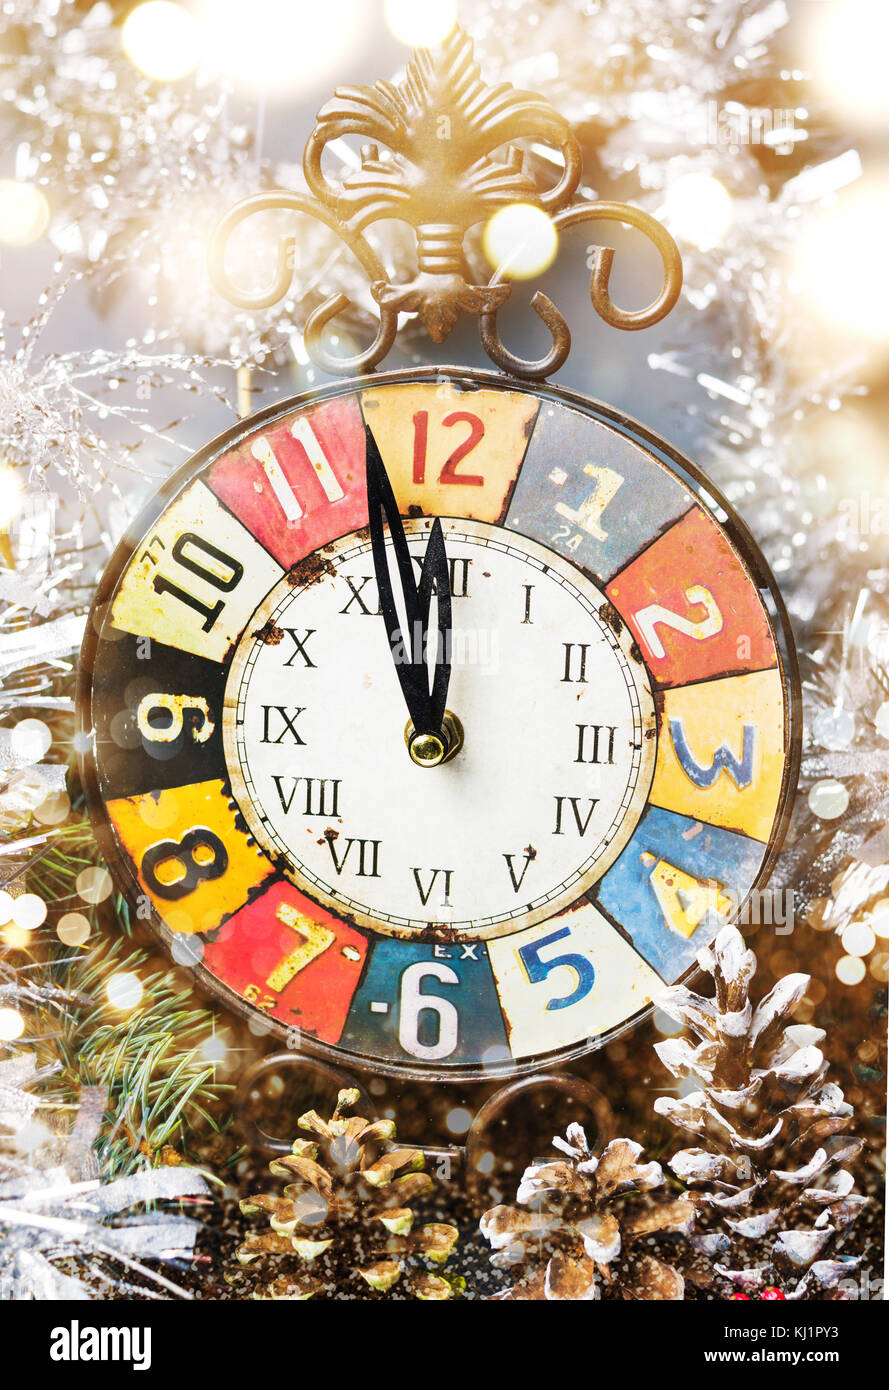 Vintage clock approaching midnight and festive Christmas decorations Stock Photo